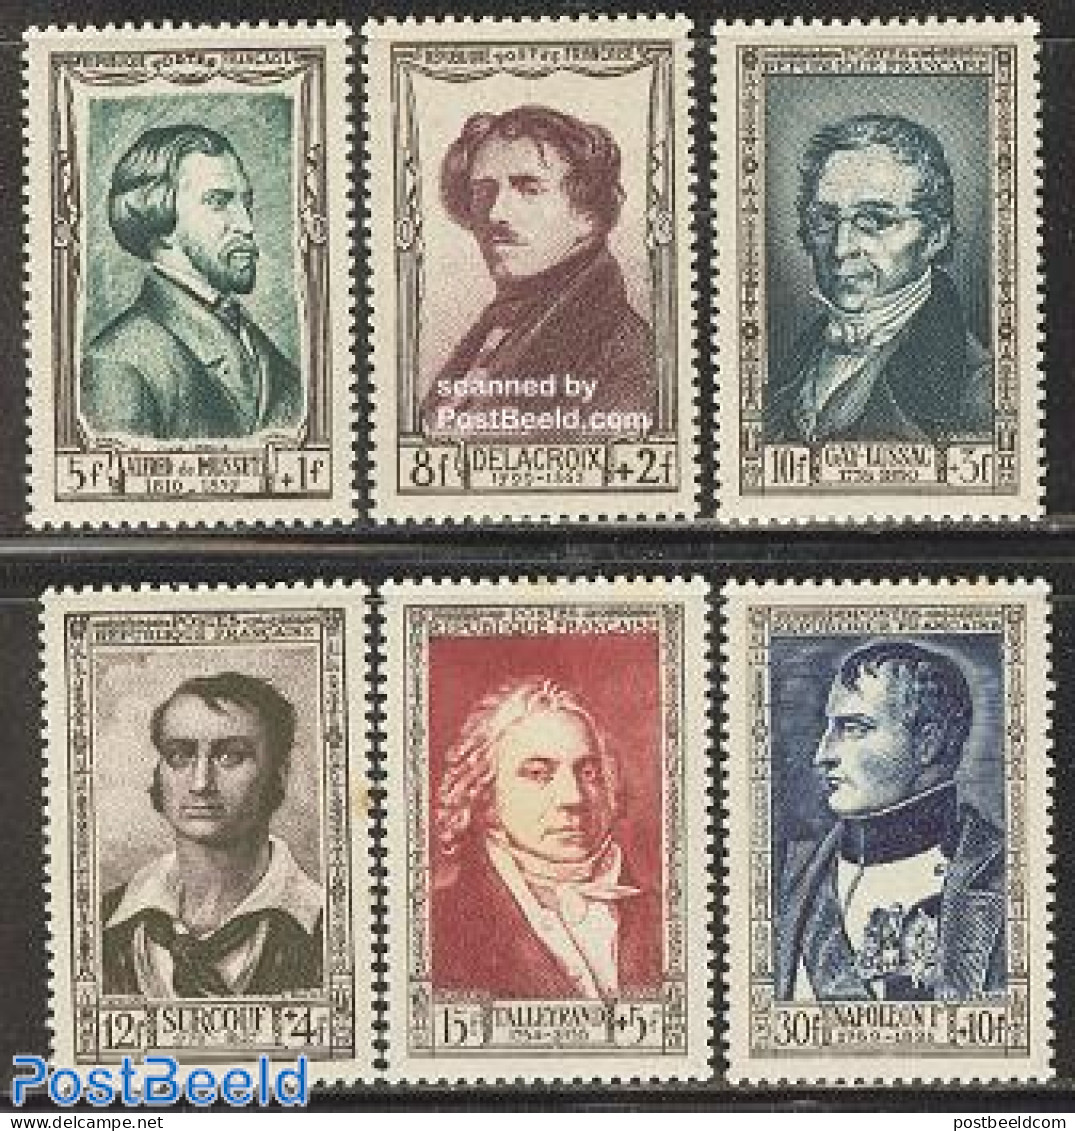 France 1951 Famous Persons 6v, Unused (hinged), History - Science - Europa Hang-on Issues - Napoleon - Politicians - C.. - Ungebraucht